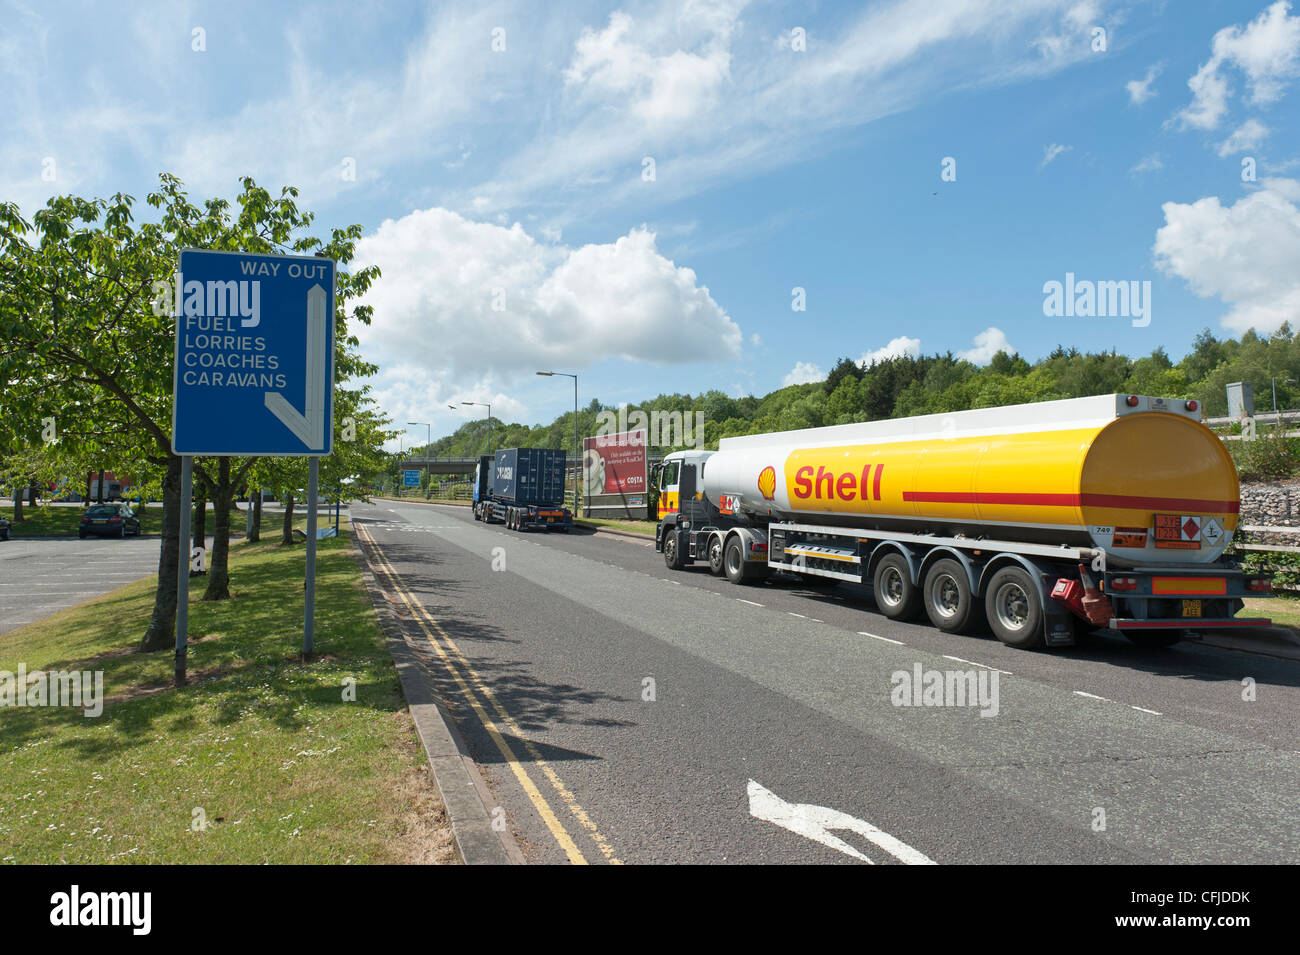 Shell Petrol tanker at Rownhams Services on the M27 (westbound) Stock Photo